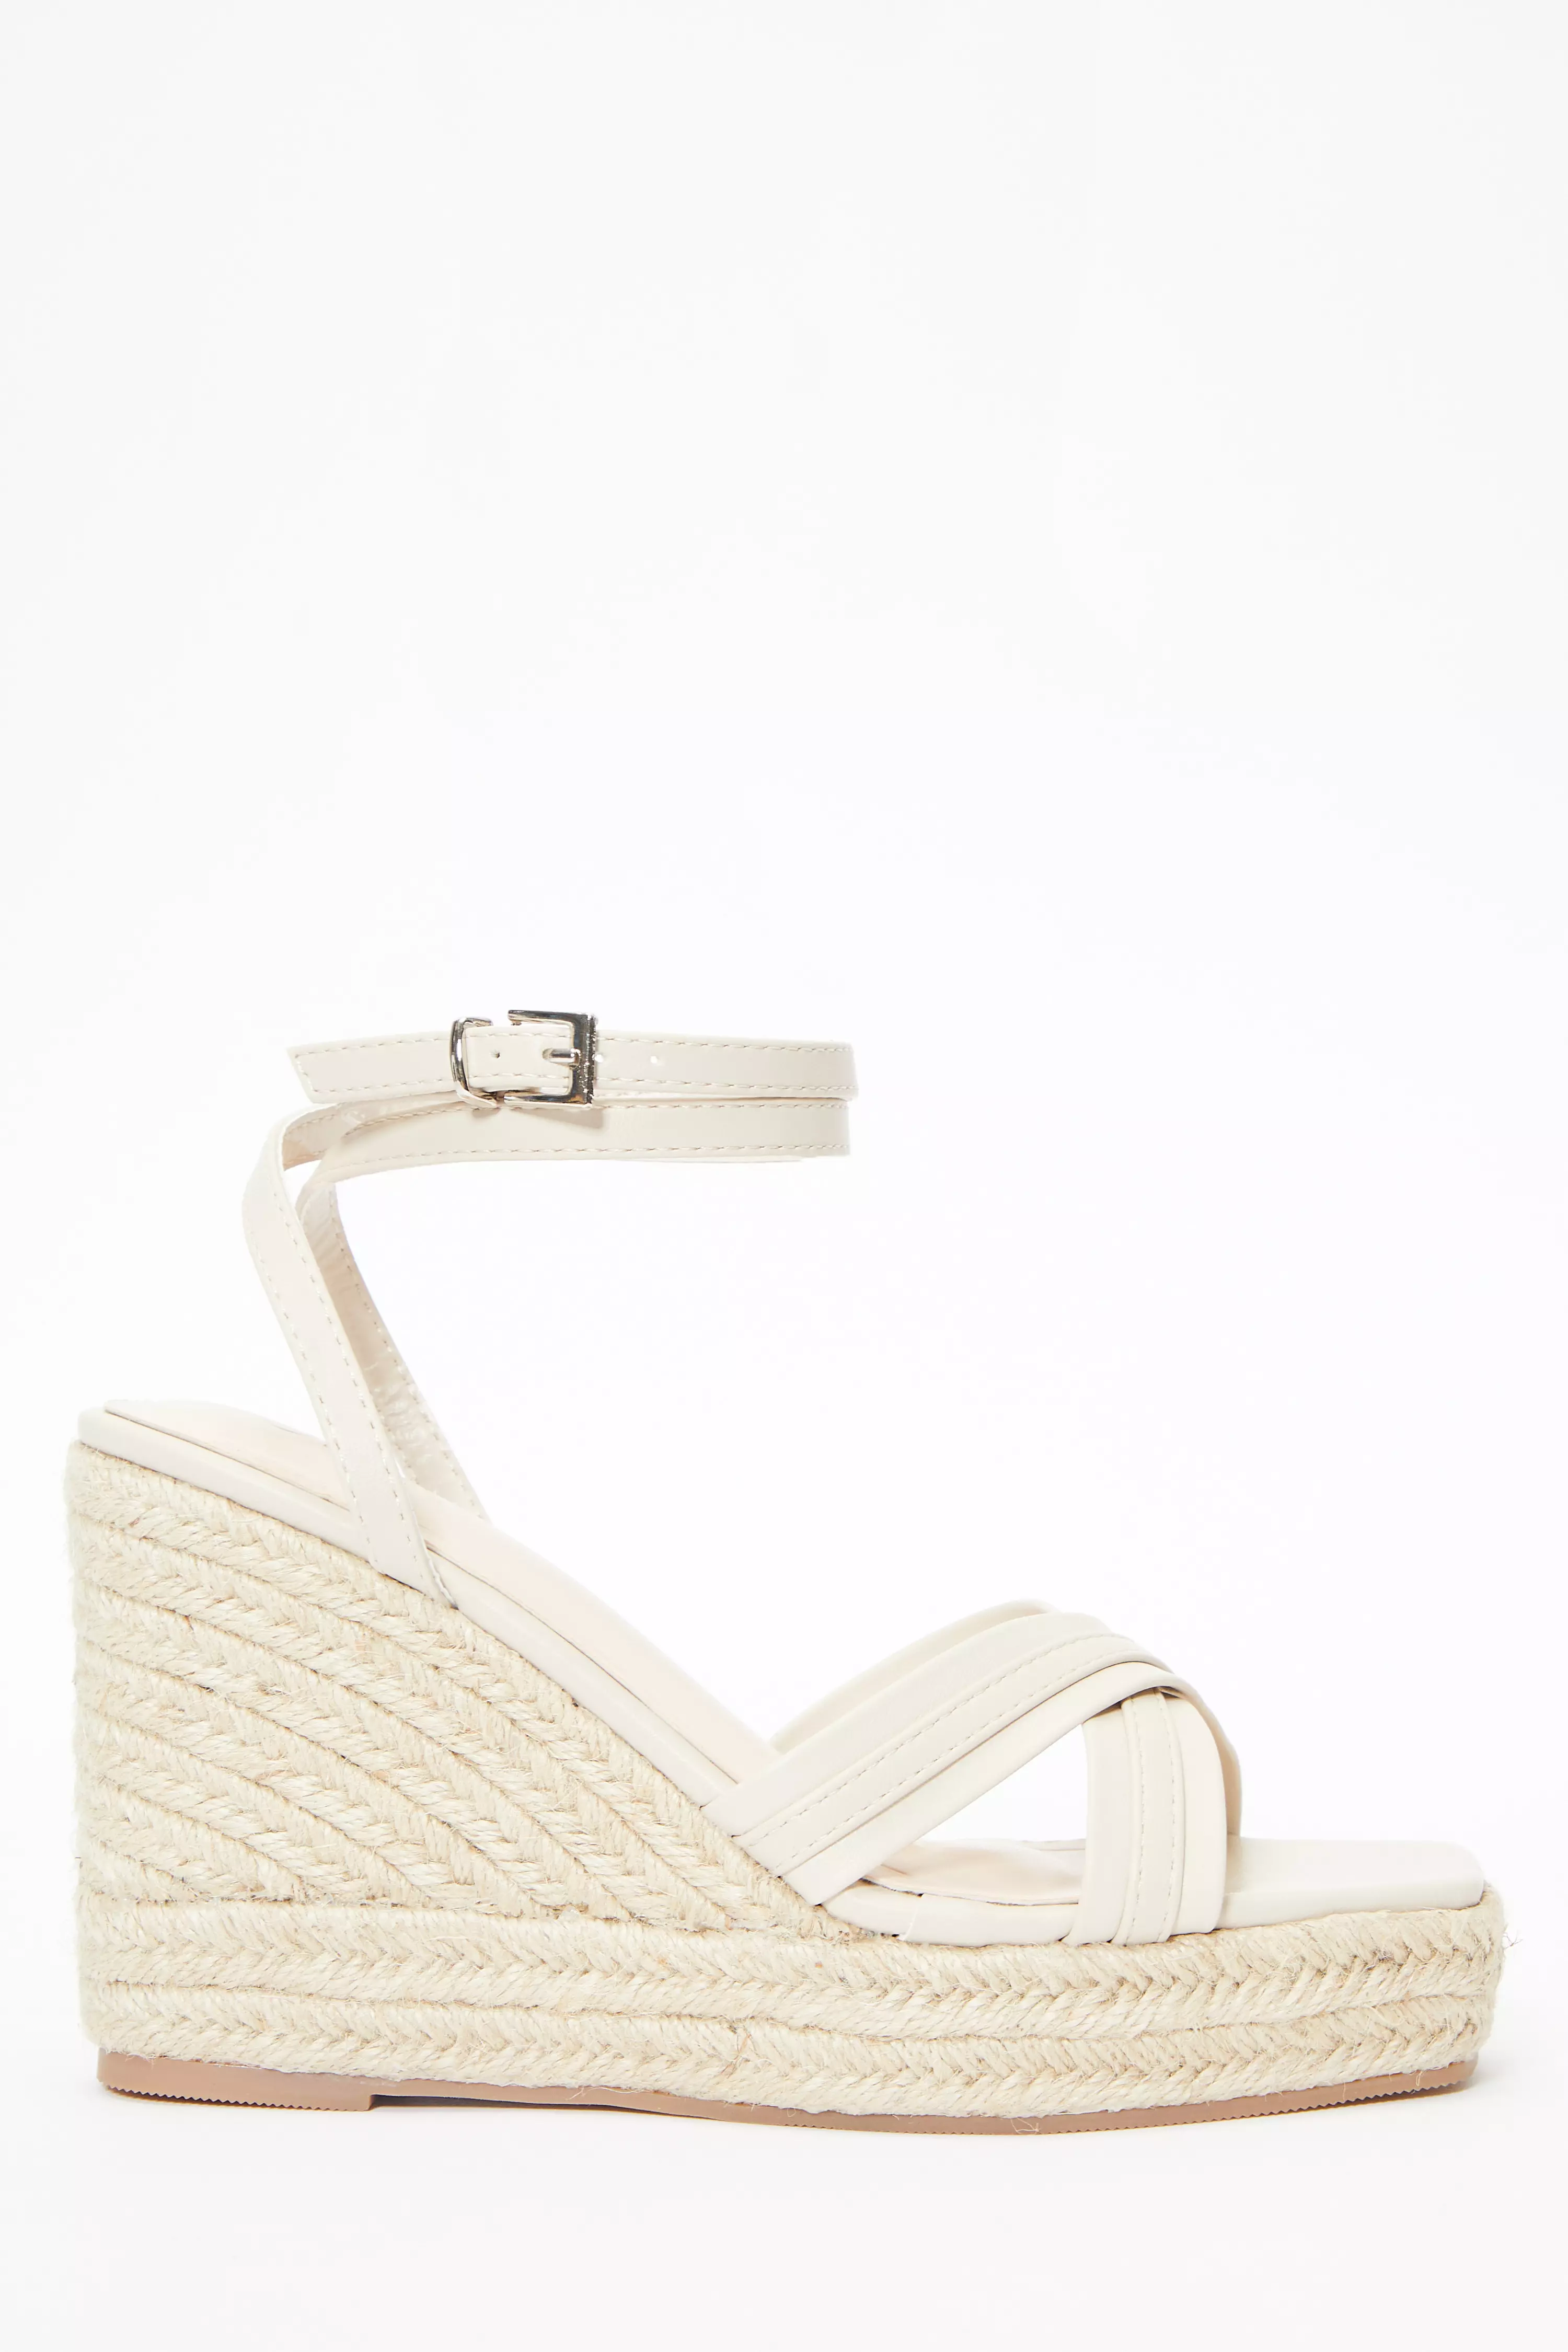 Nude Cross Strap Wedges - QUIZ Clothing